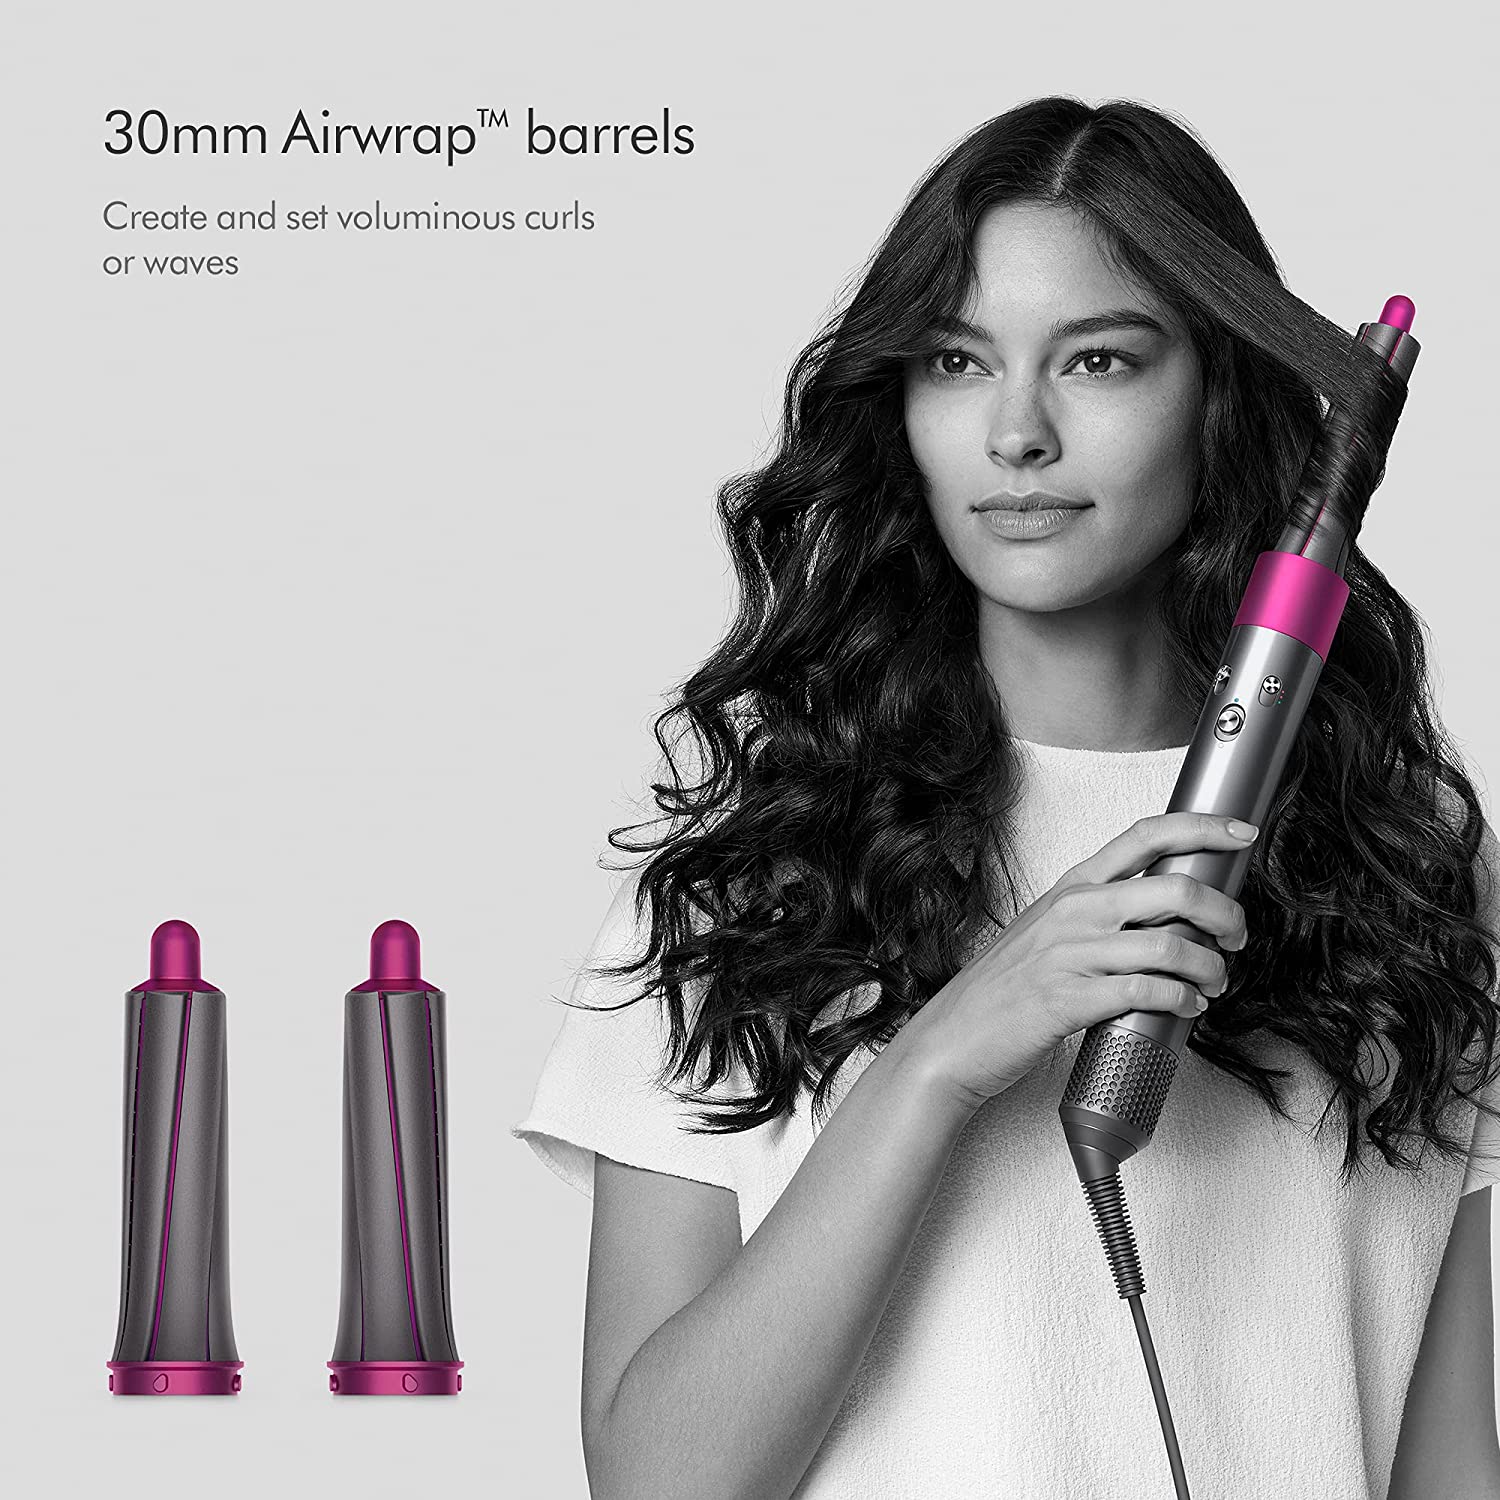 Amazon Offer: The Dyson Airwrap, which has left everyone behind in hair styler technology, know how to protect your hair from damage?